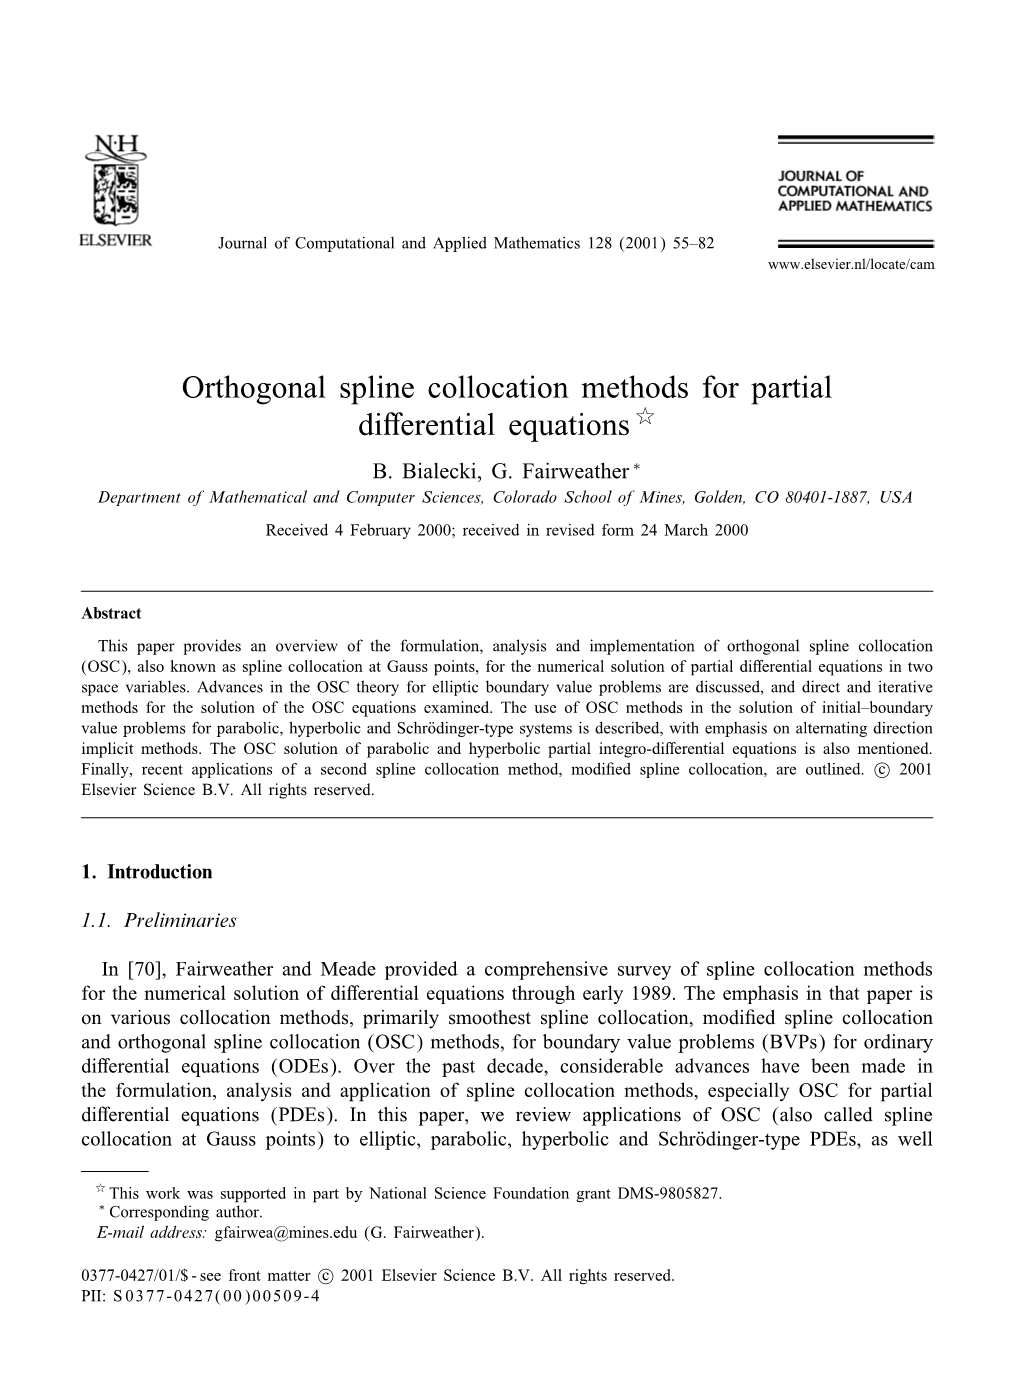 Orthogonal Spline Collocation Methods for Partial Differential Equations